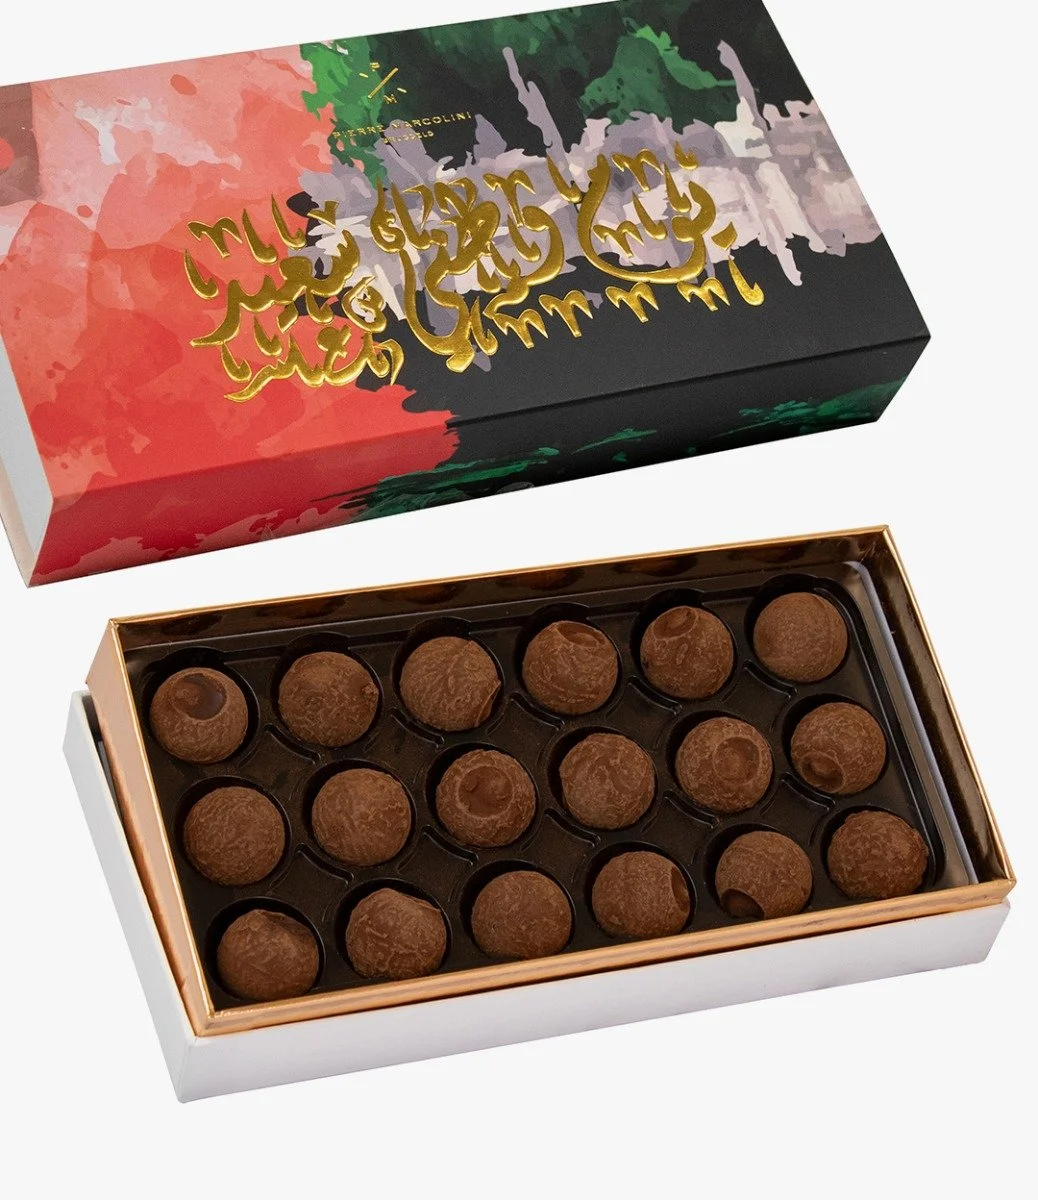 Plumier Truffes Du Jour National Day 2022 Collection by Pierre Marcolini